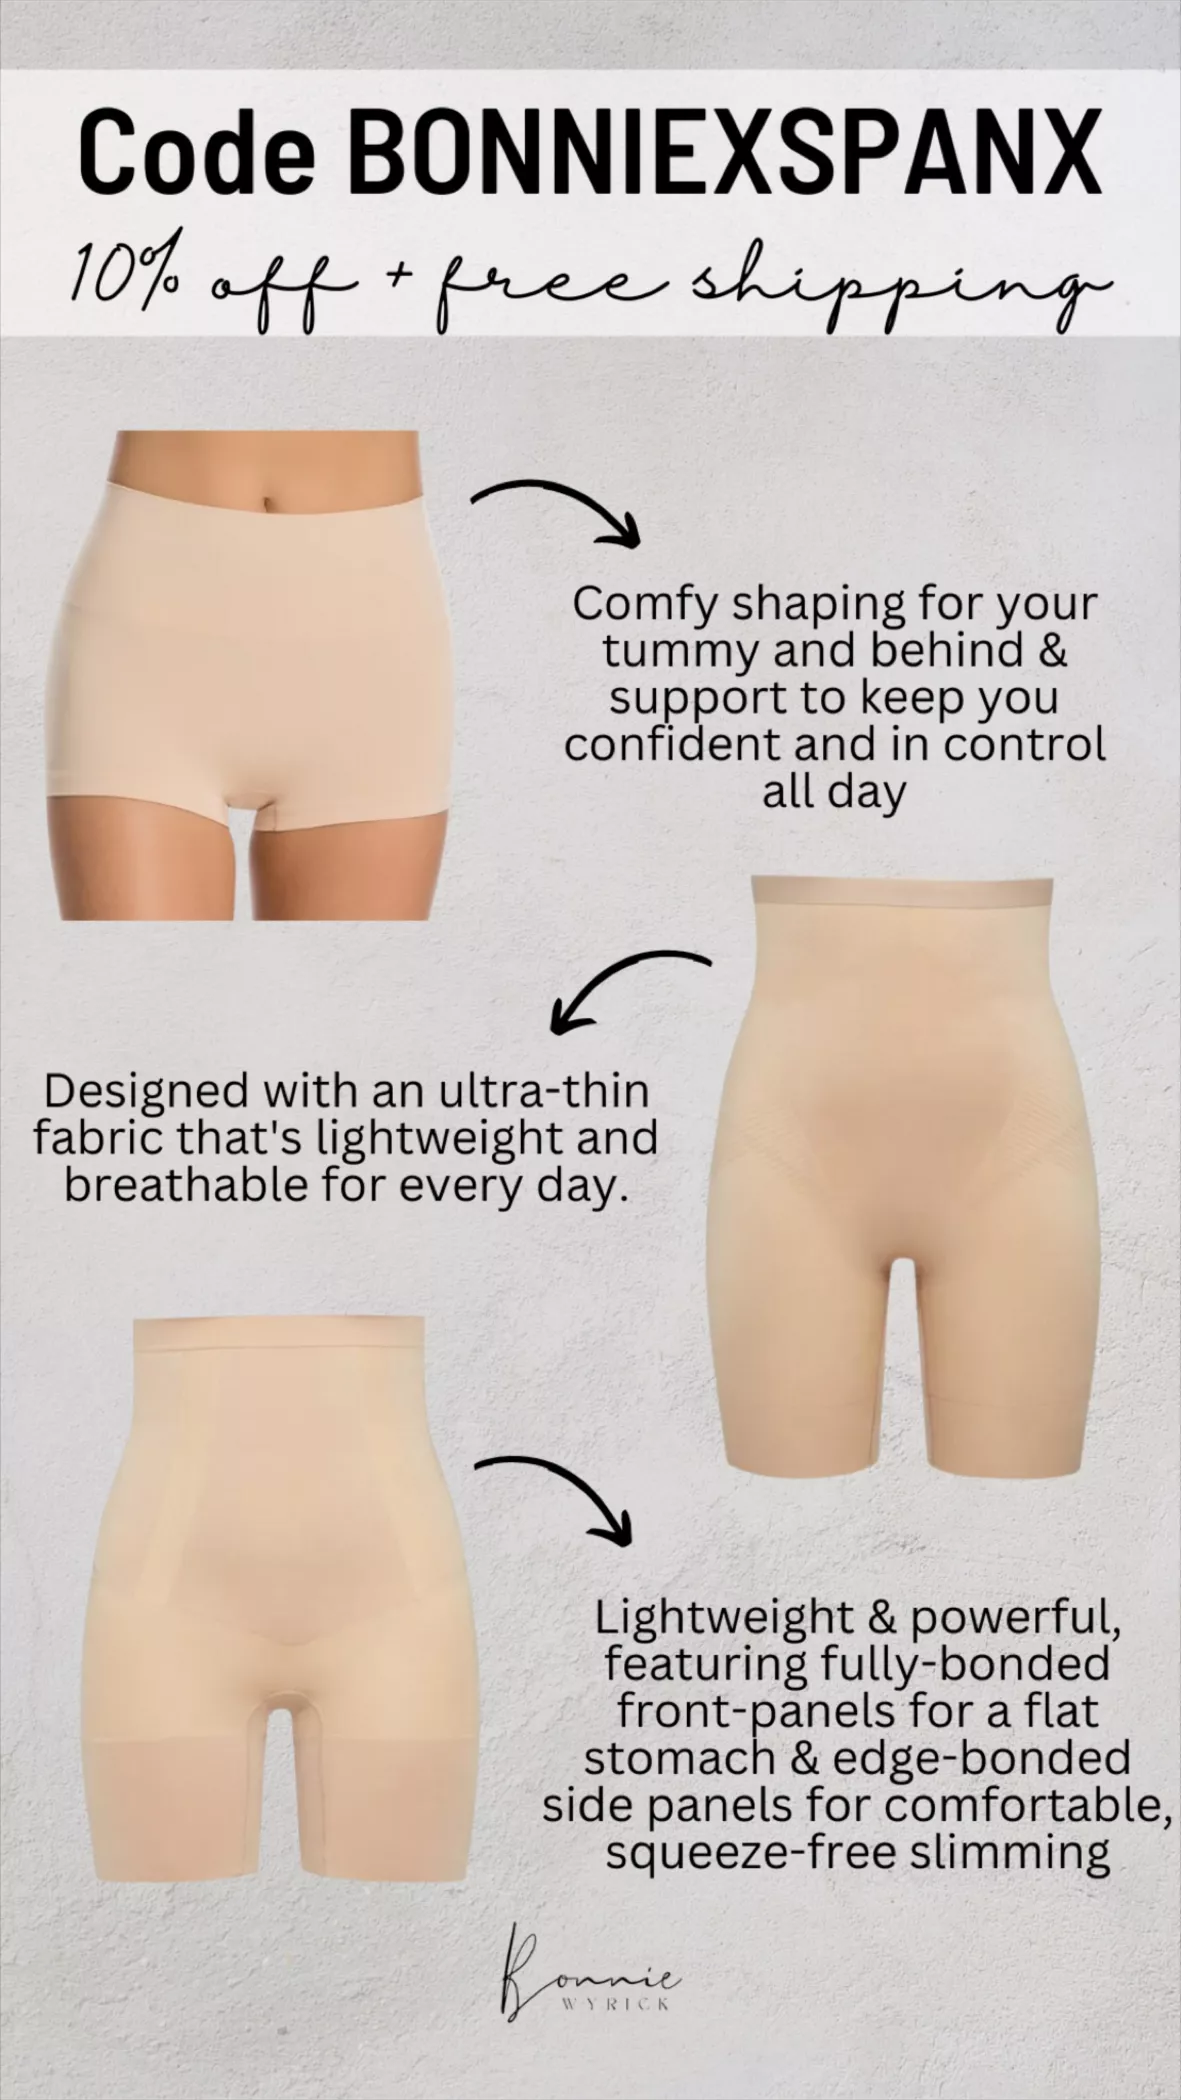 SPANX best seller for style & comfort- featuring waist shaping